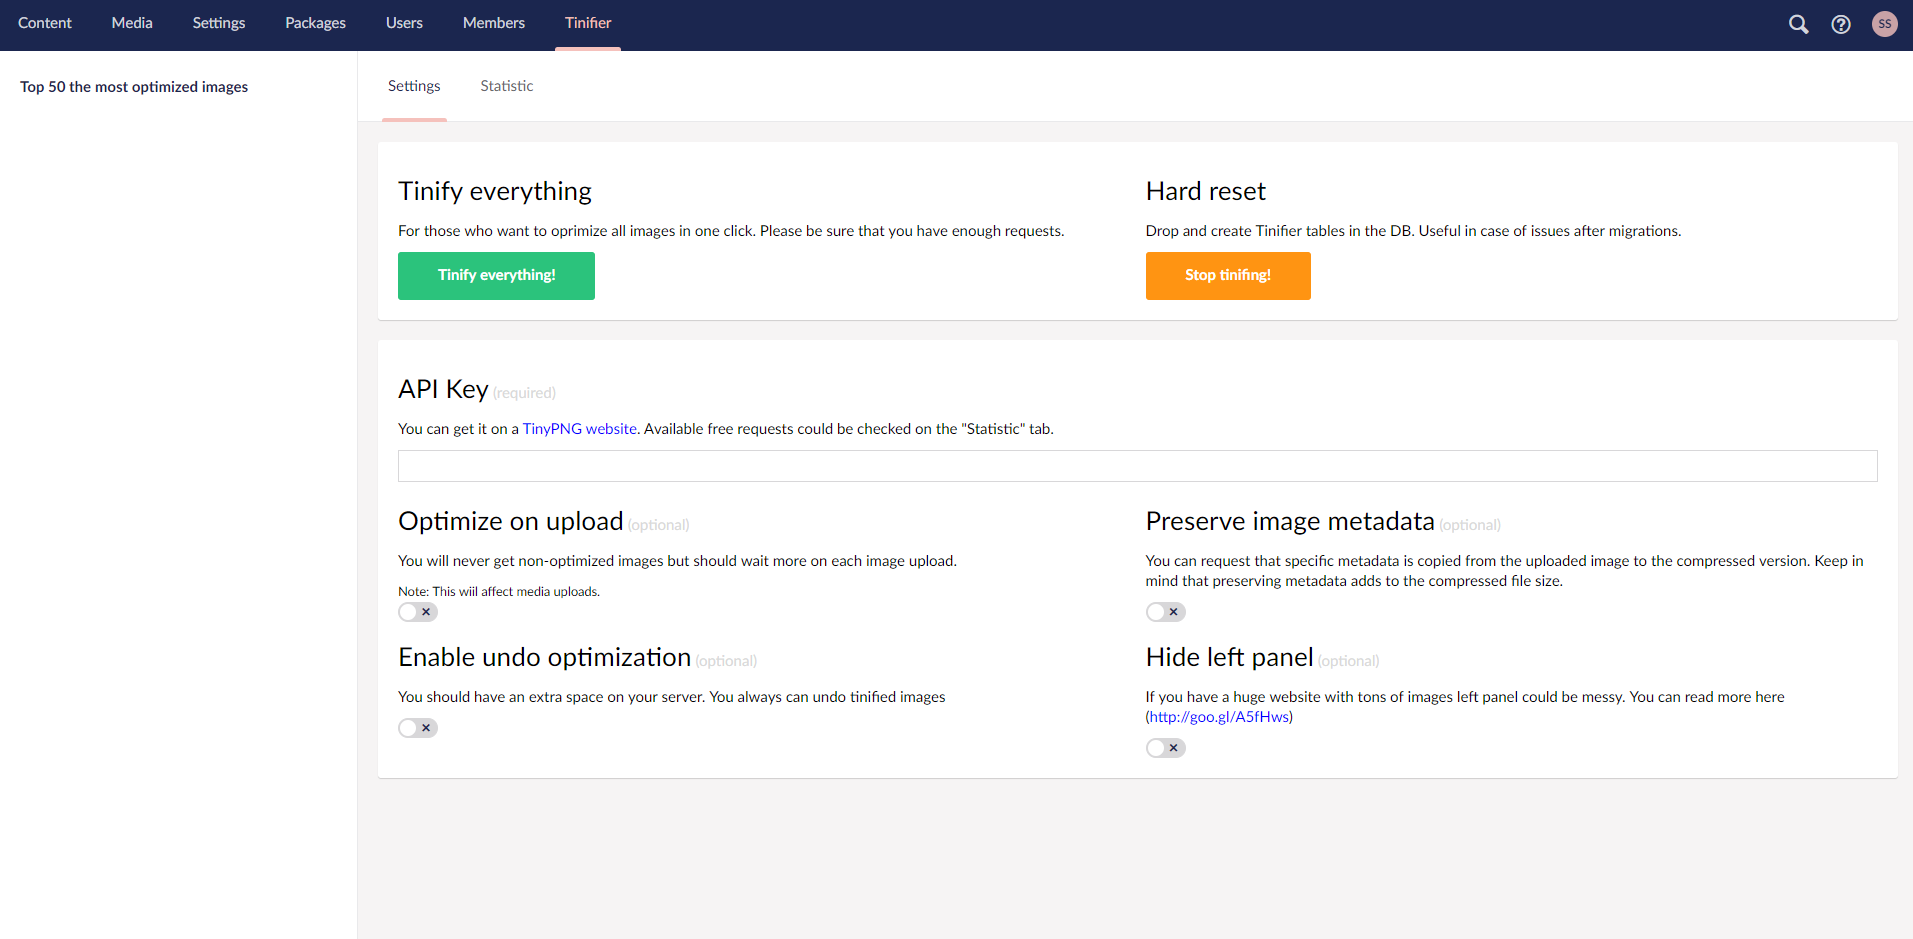 Tinifier works in Umbraco 8.3